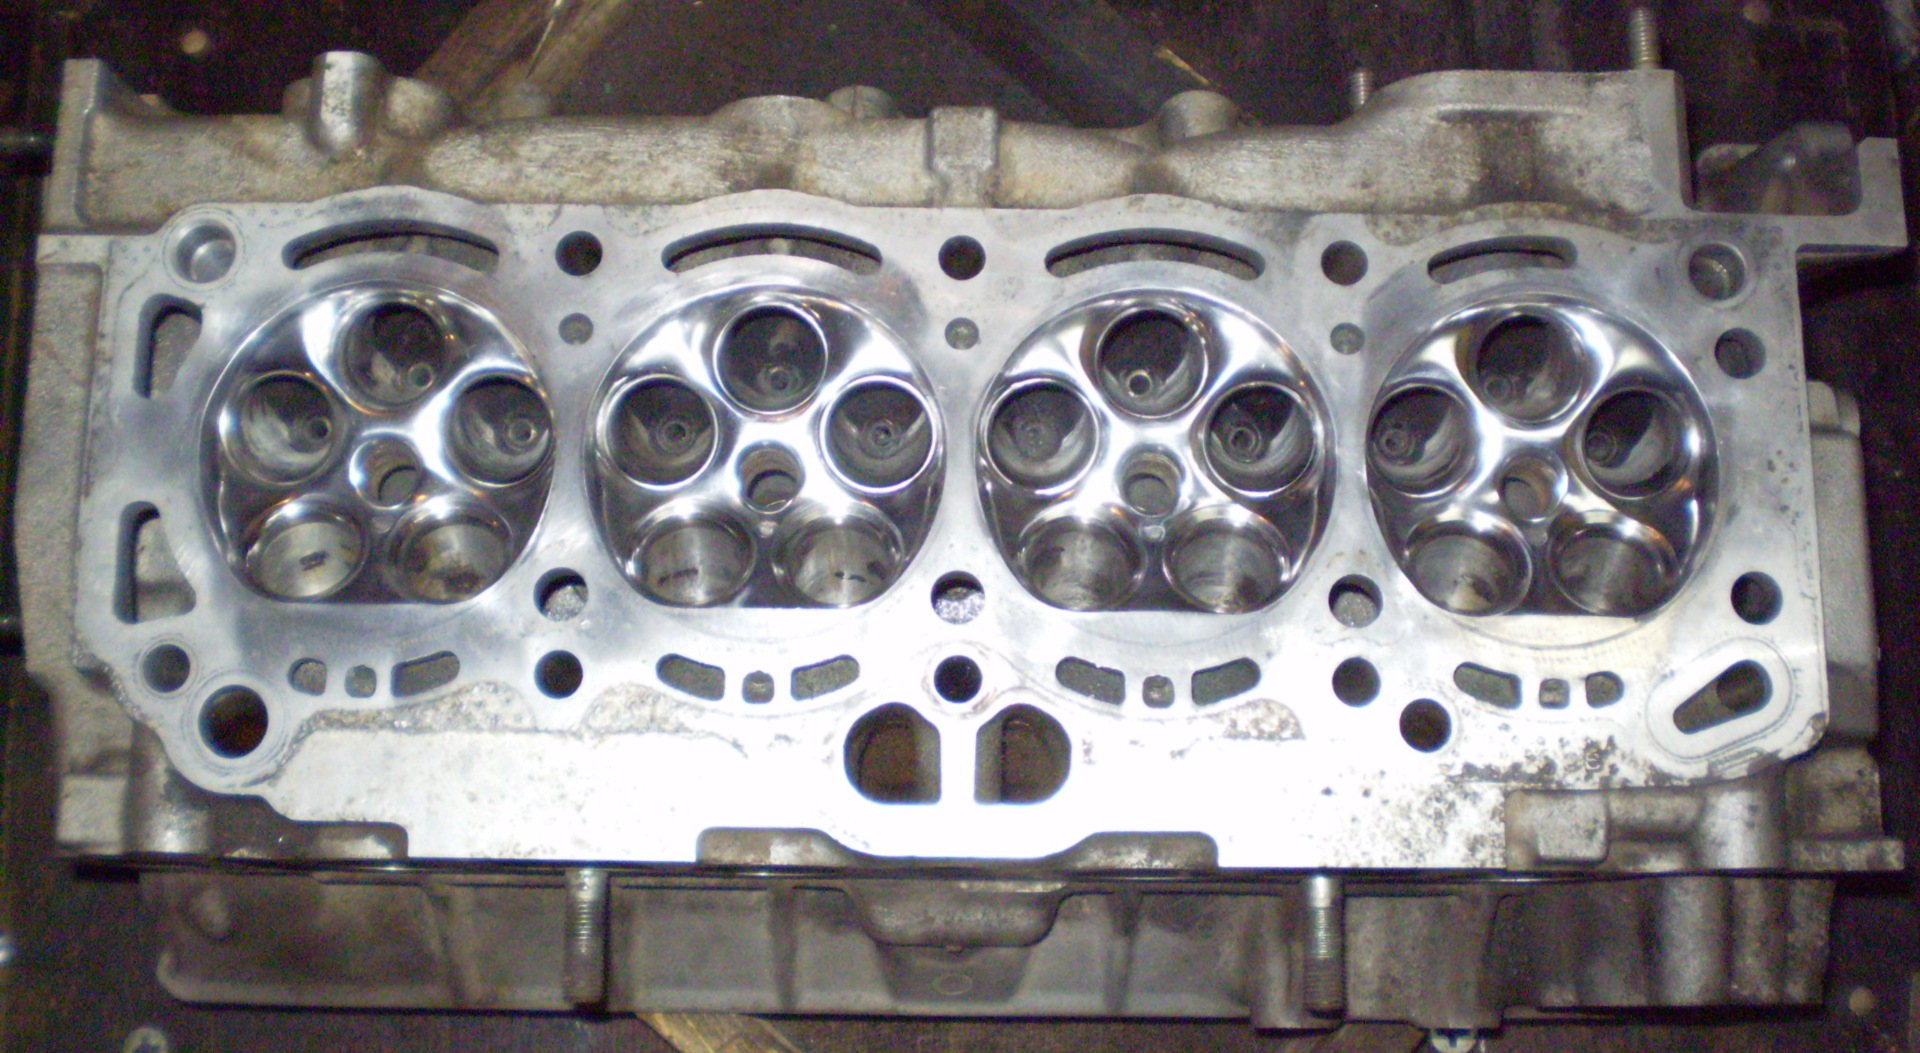 7 Well what what  - Capital  4A-GE BT  2 - Toyota Sprinter Trueno 16 L 1998